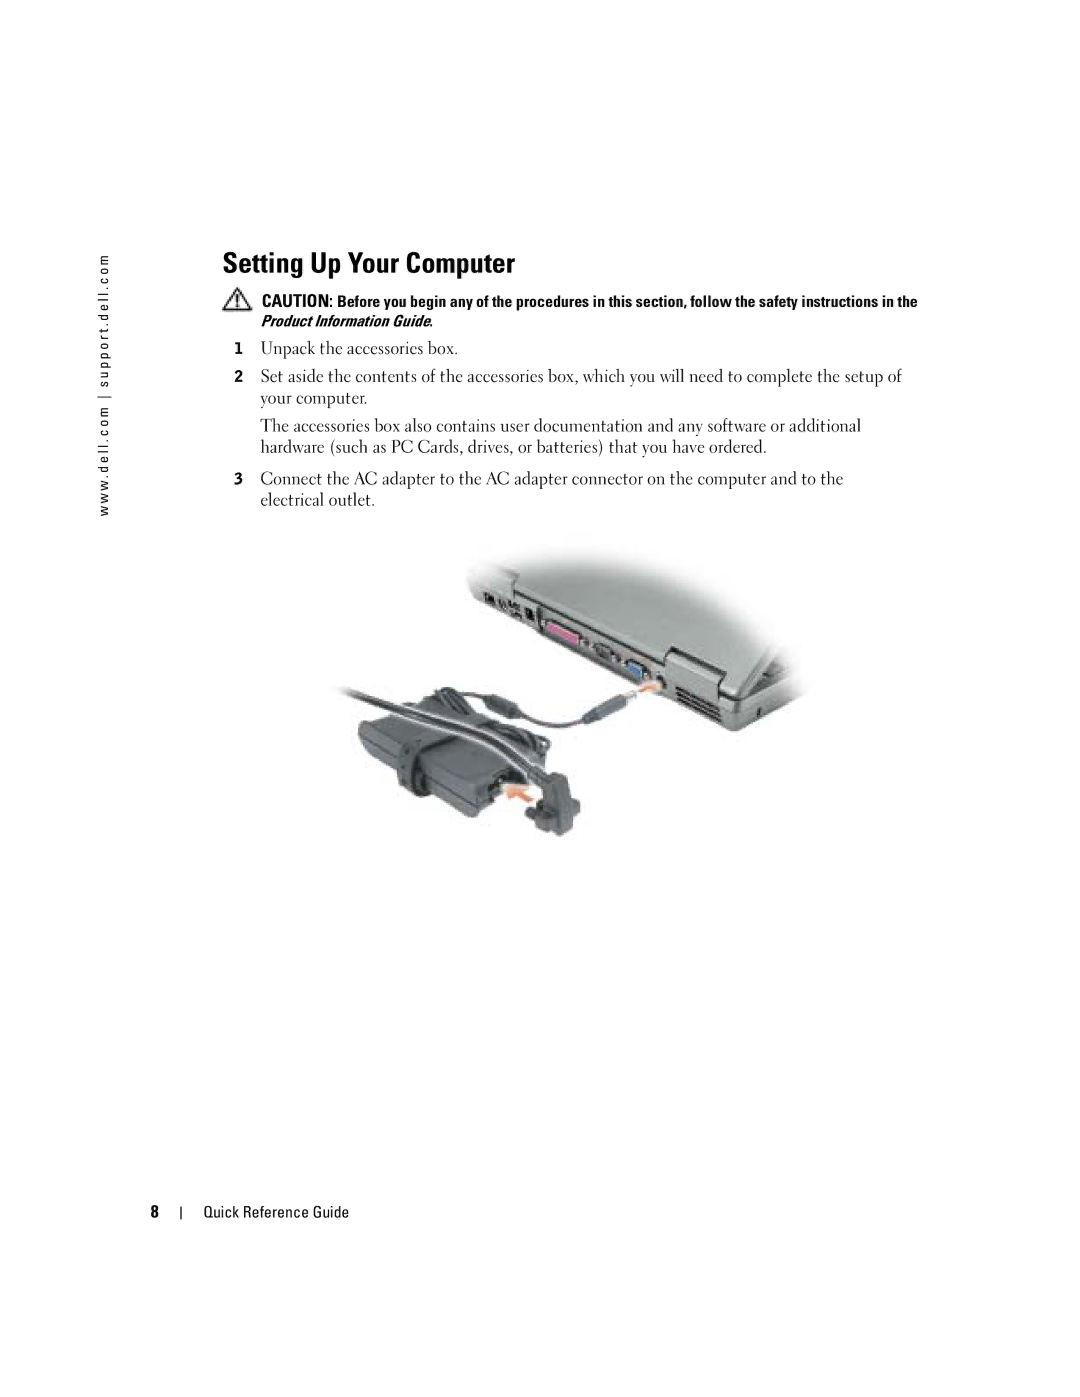 Dell D610 manual Setting Up Your Computer, Product Information Guide 